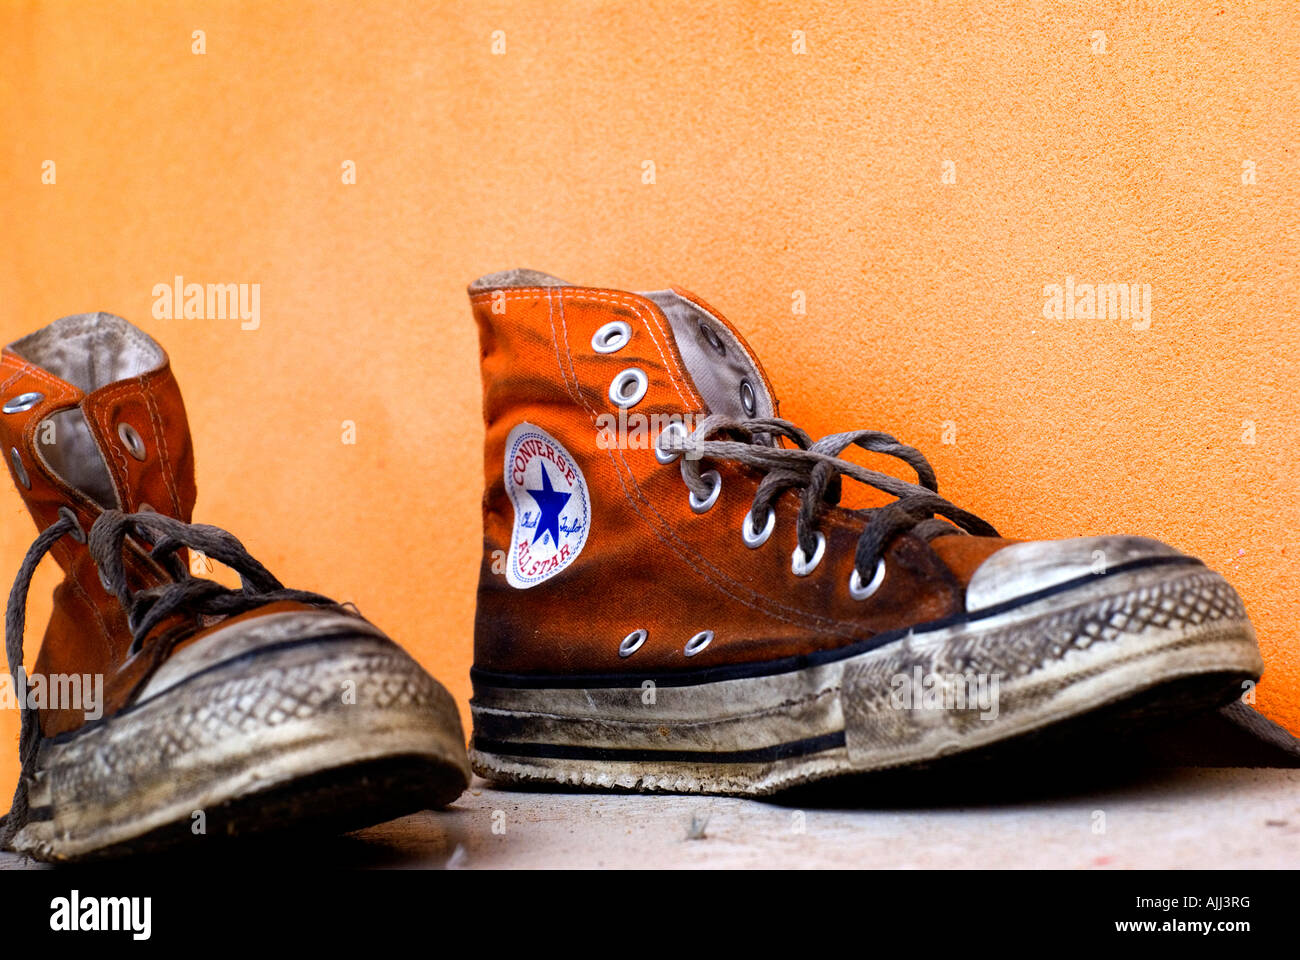 mord oase periskop Old used and soiled orange Converse All Star shoes on an orange background  Stock Photo - Alamy